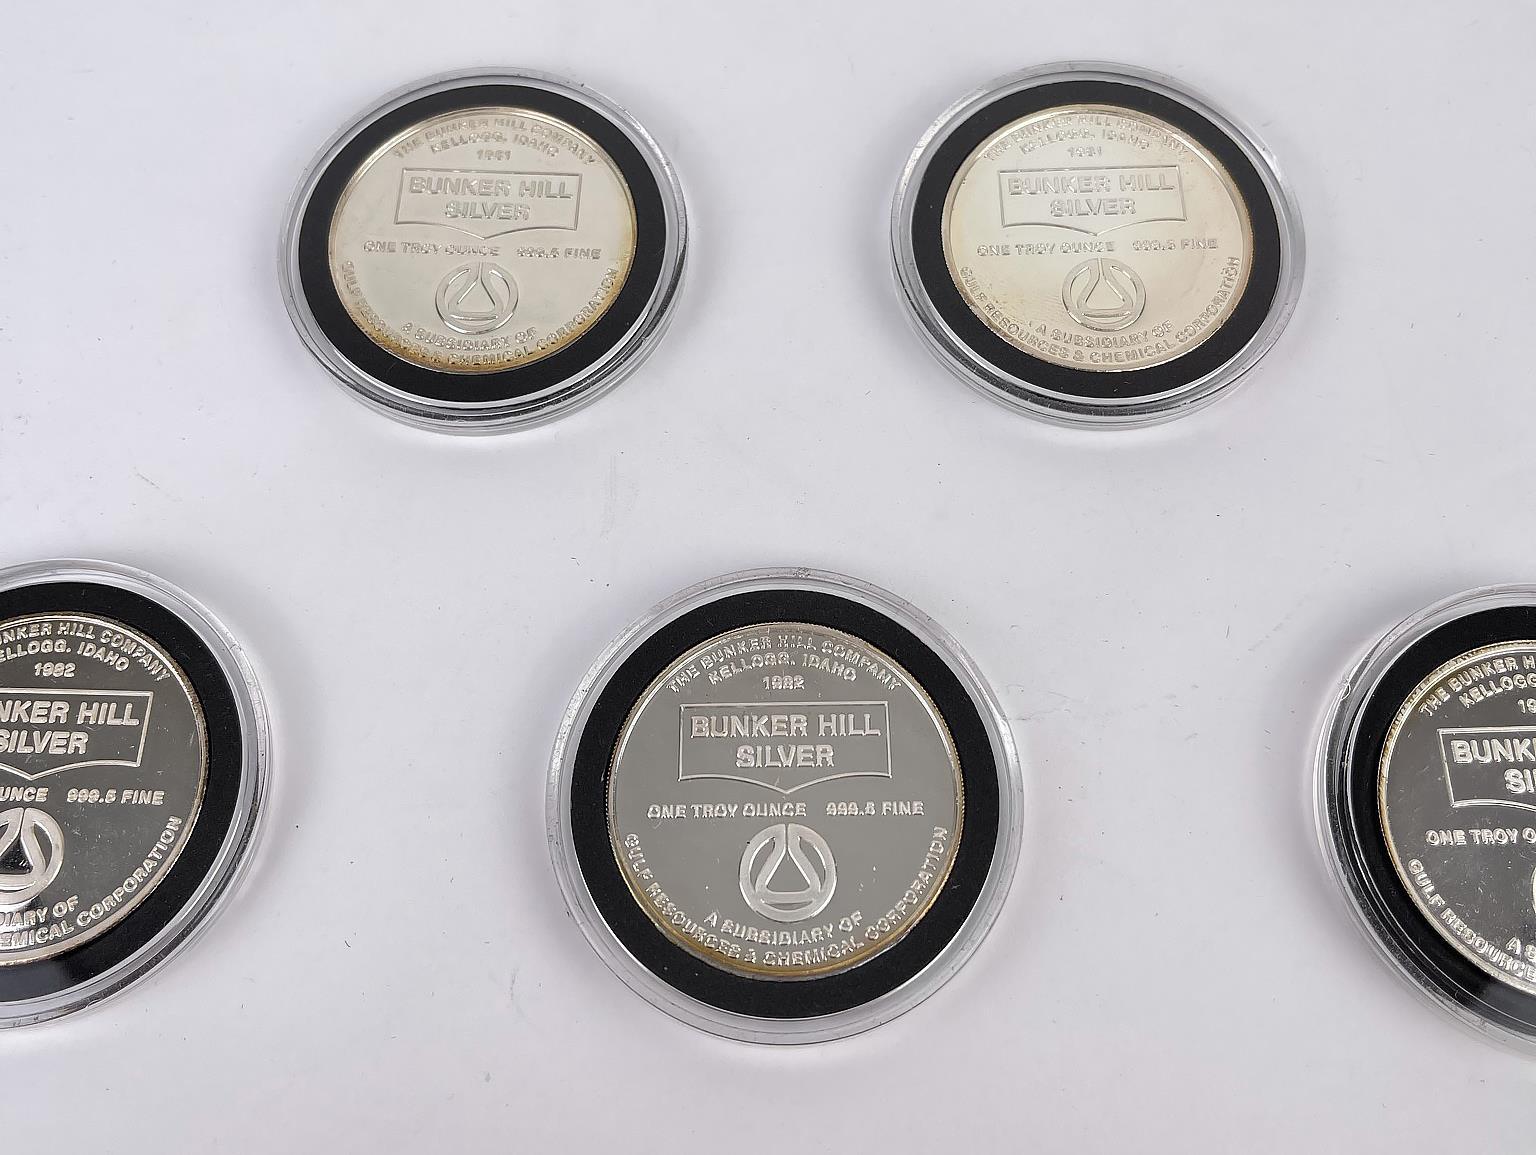 1982 The Bunker Hill Company Silver Medallion Set